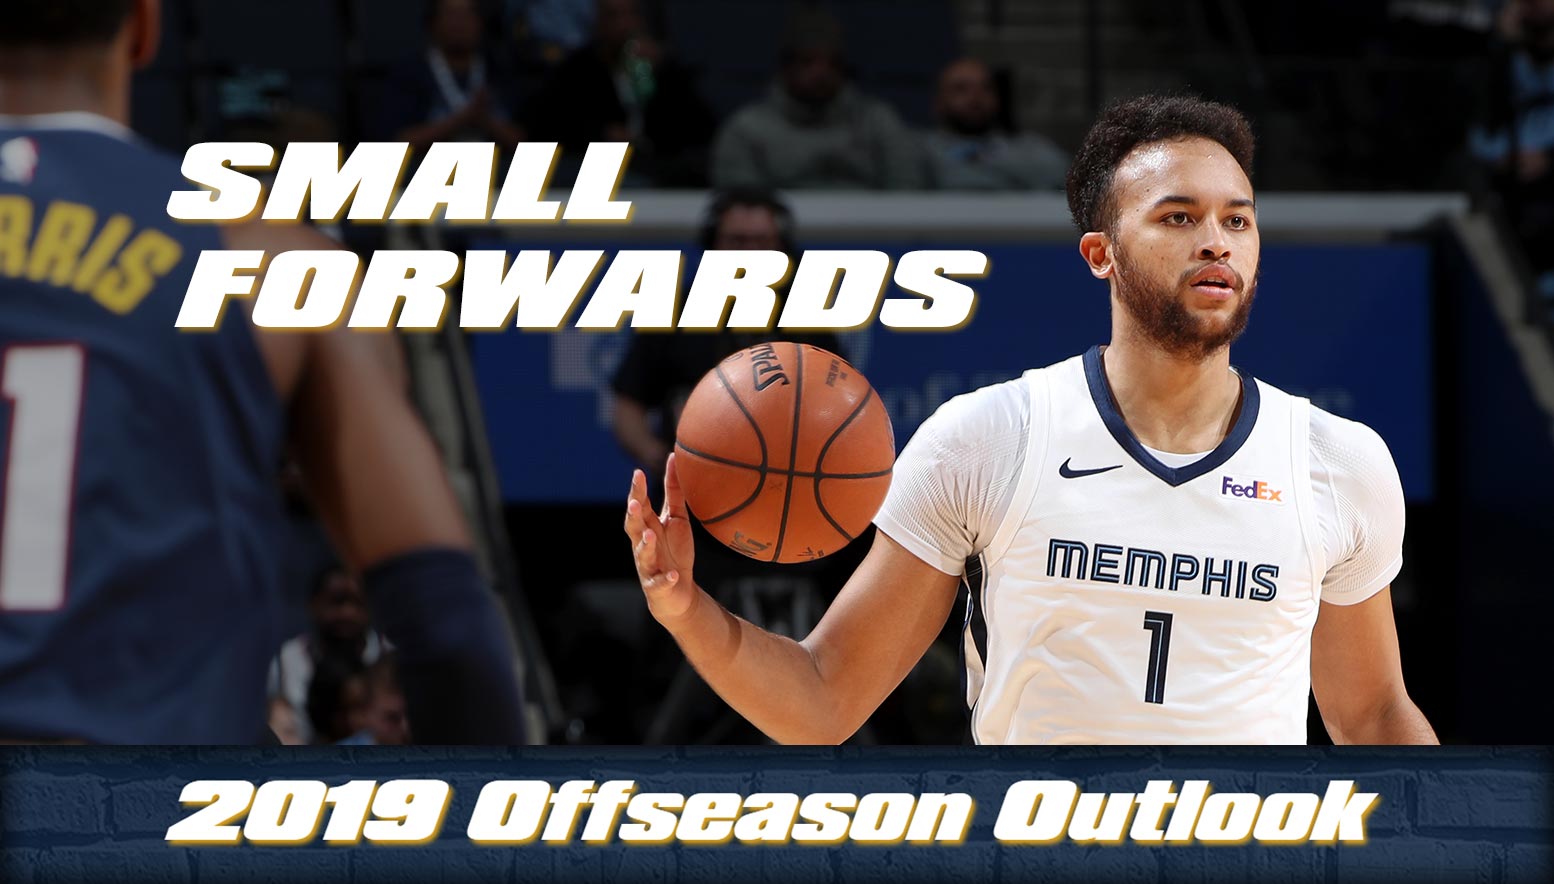 MikeCheck: With shoulder surgery behind him, Anderson still counts on being right fit for Grizz